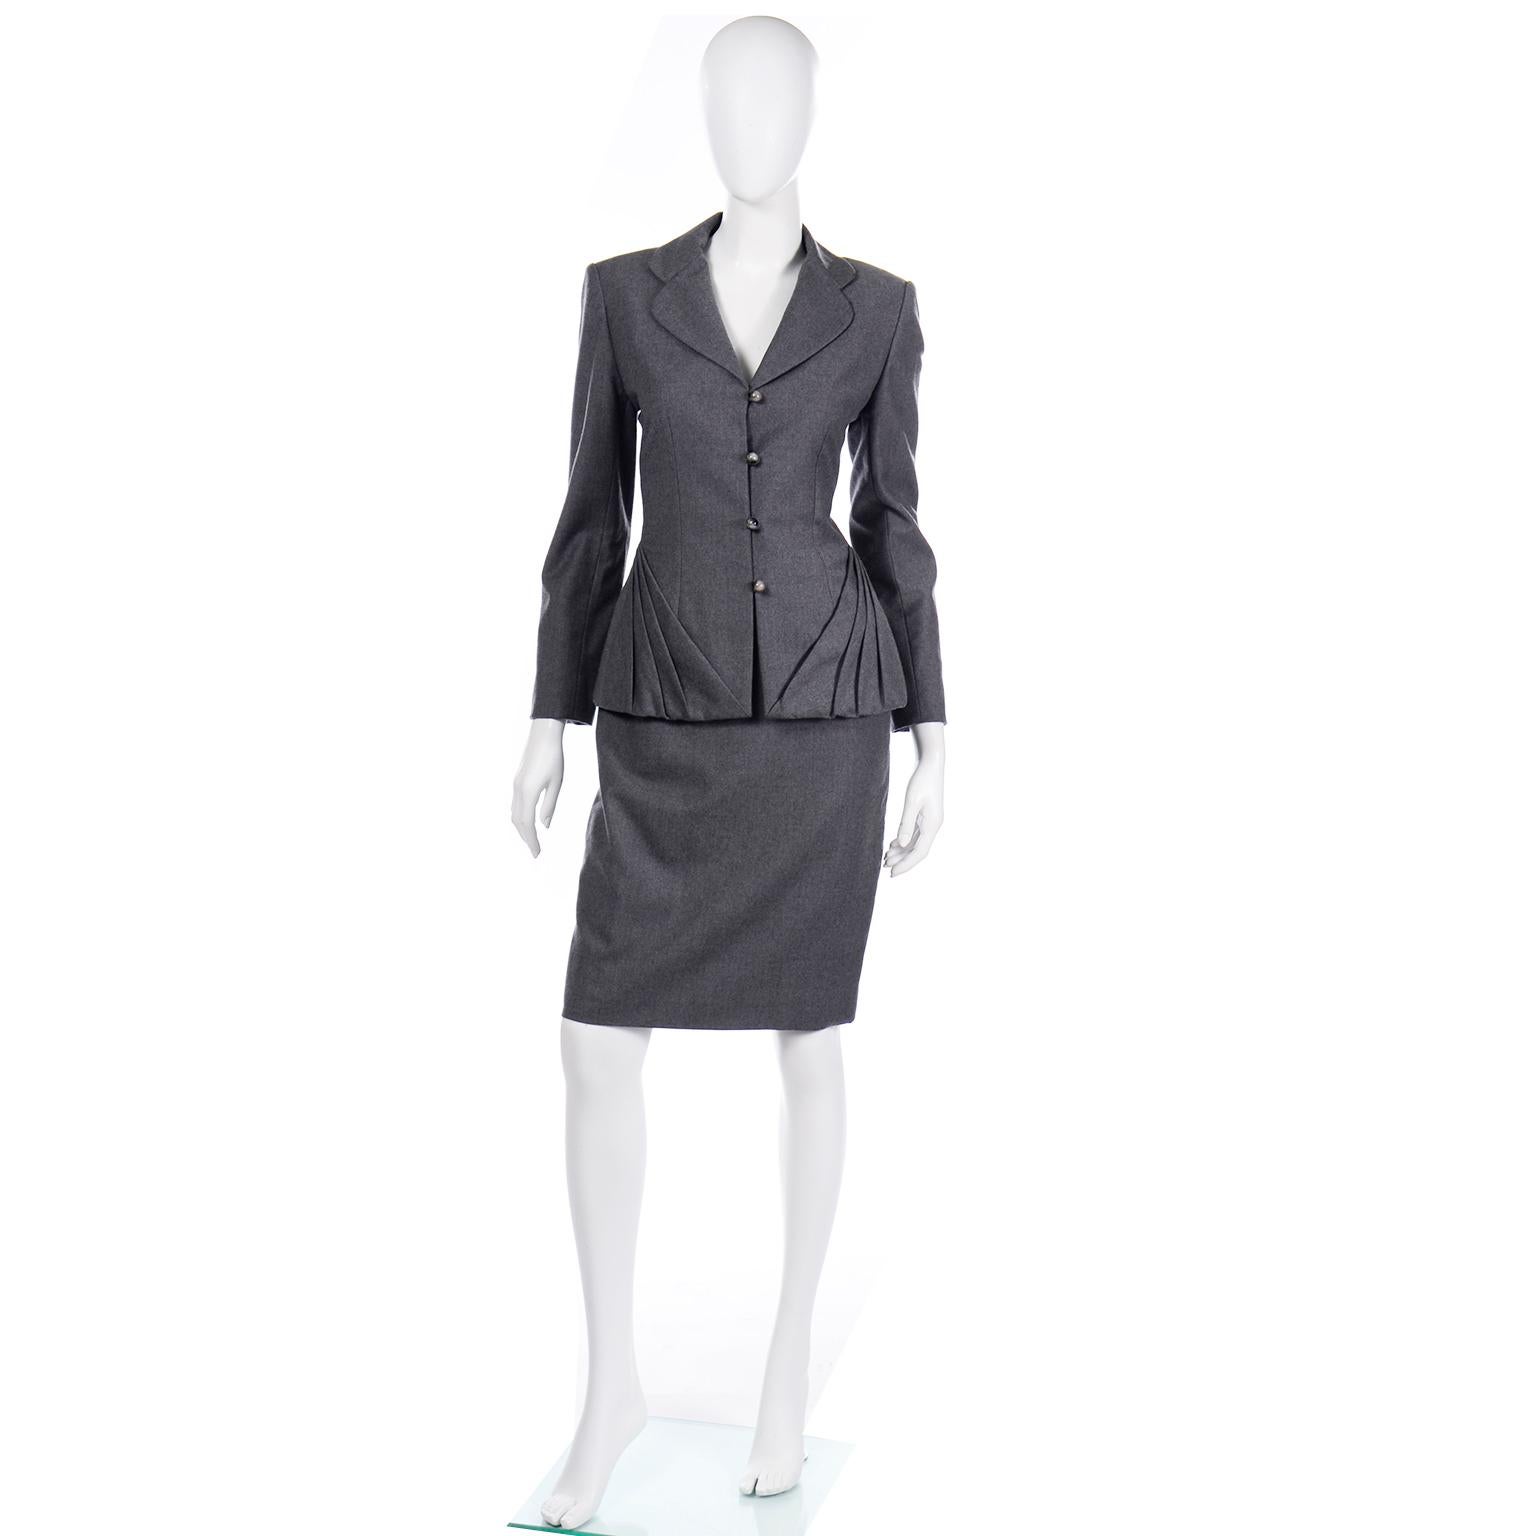 This is such a unique vintage wool skirt and jacket suit designed by the iconic American designer Bill Blass. We love finding vintage Bill Blass pieces like this and this is a great outfit that can be worn together or as easy to wear separates.
At